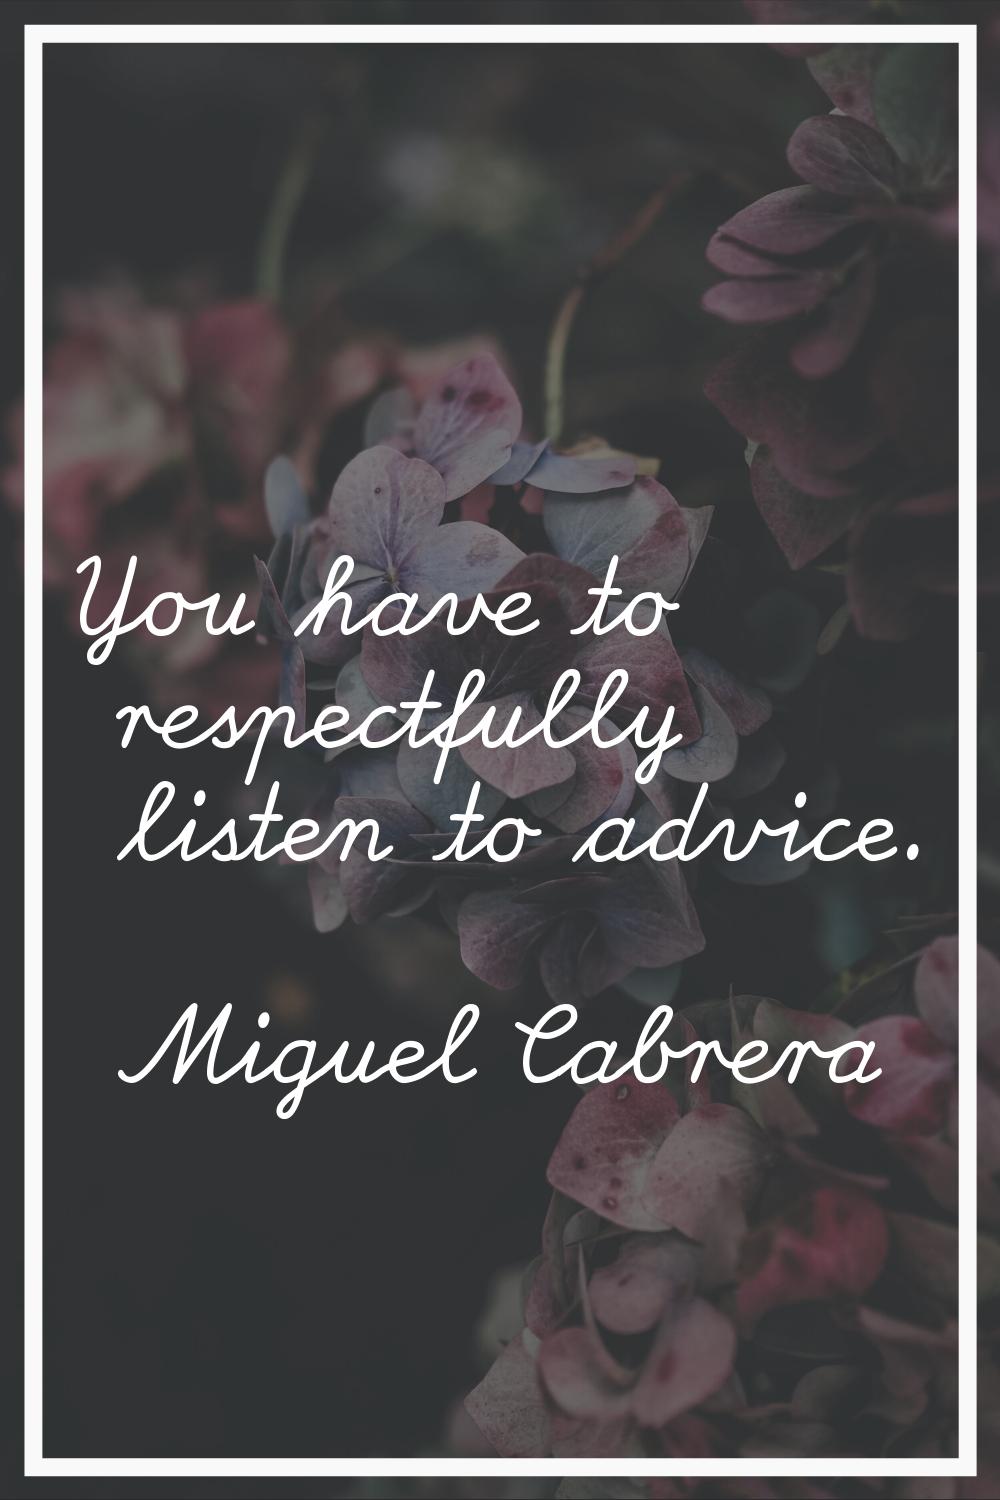 You have to respectfully listen to advice.